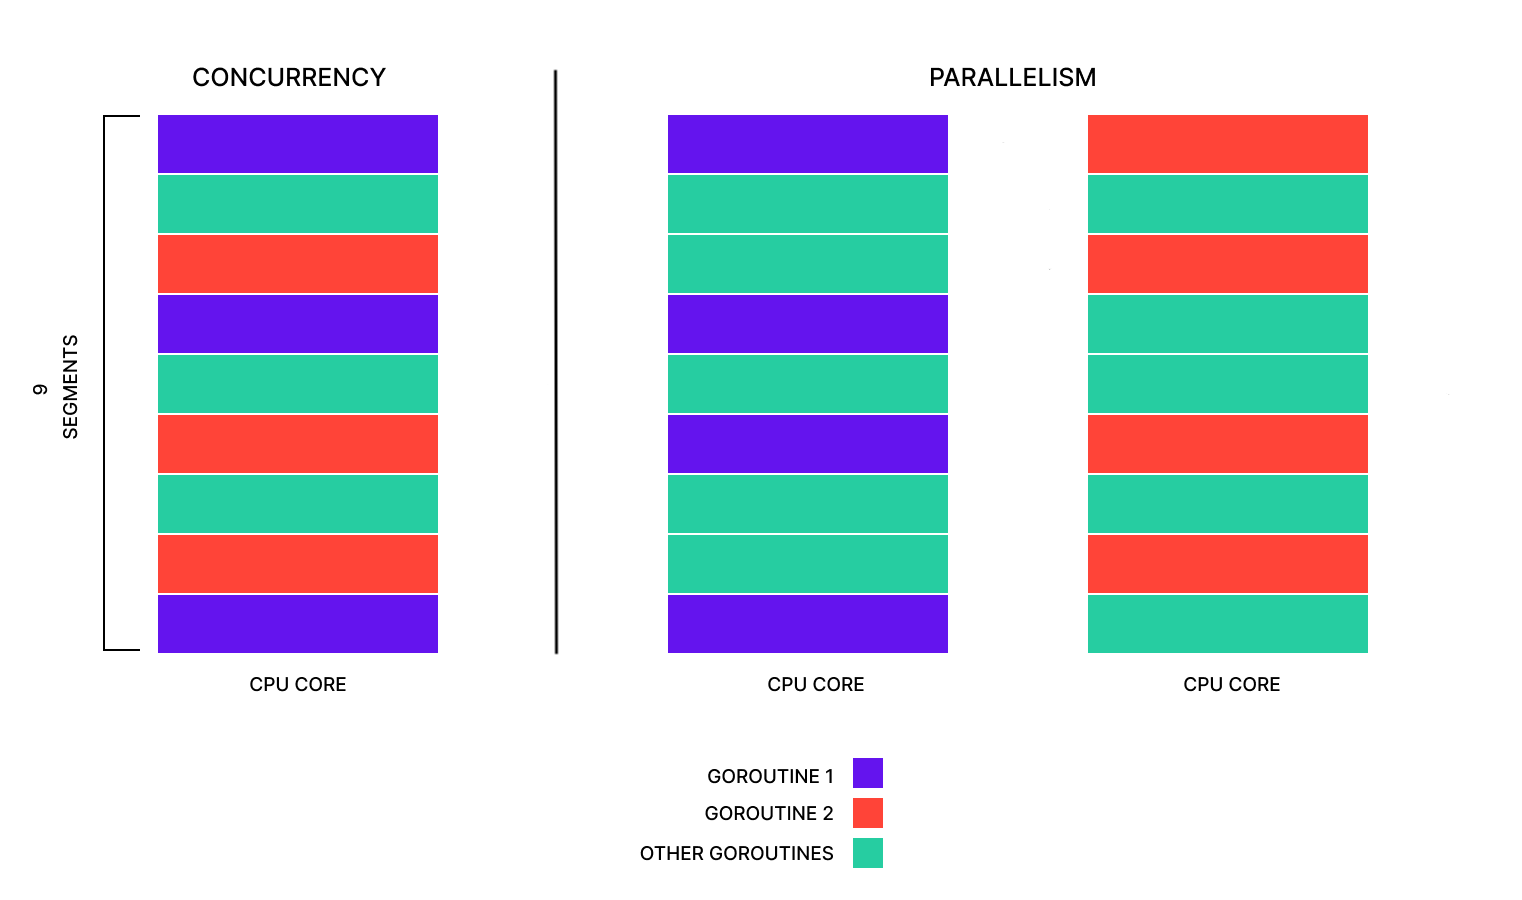 Diagram split into two columns, labeled Concurrency and Parallelism. The Concurrency column has a single tall rectangle, labeled CPU core, divided into stacked sections of varying colors signifying different functions. The Parallelism column has two similar tall rectangles, both labeled CPU core, with each stacked section signifying different functions, except it only shows goroutine1 running on the left core and goroutine2 running on the right core.